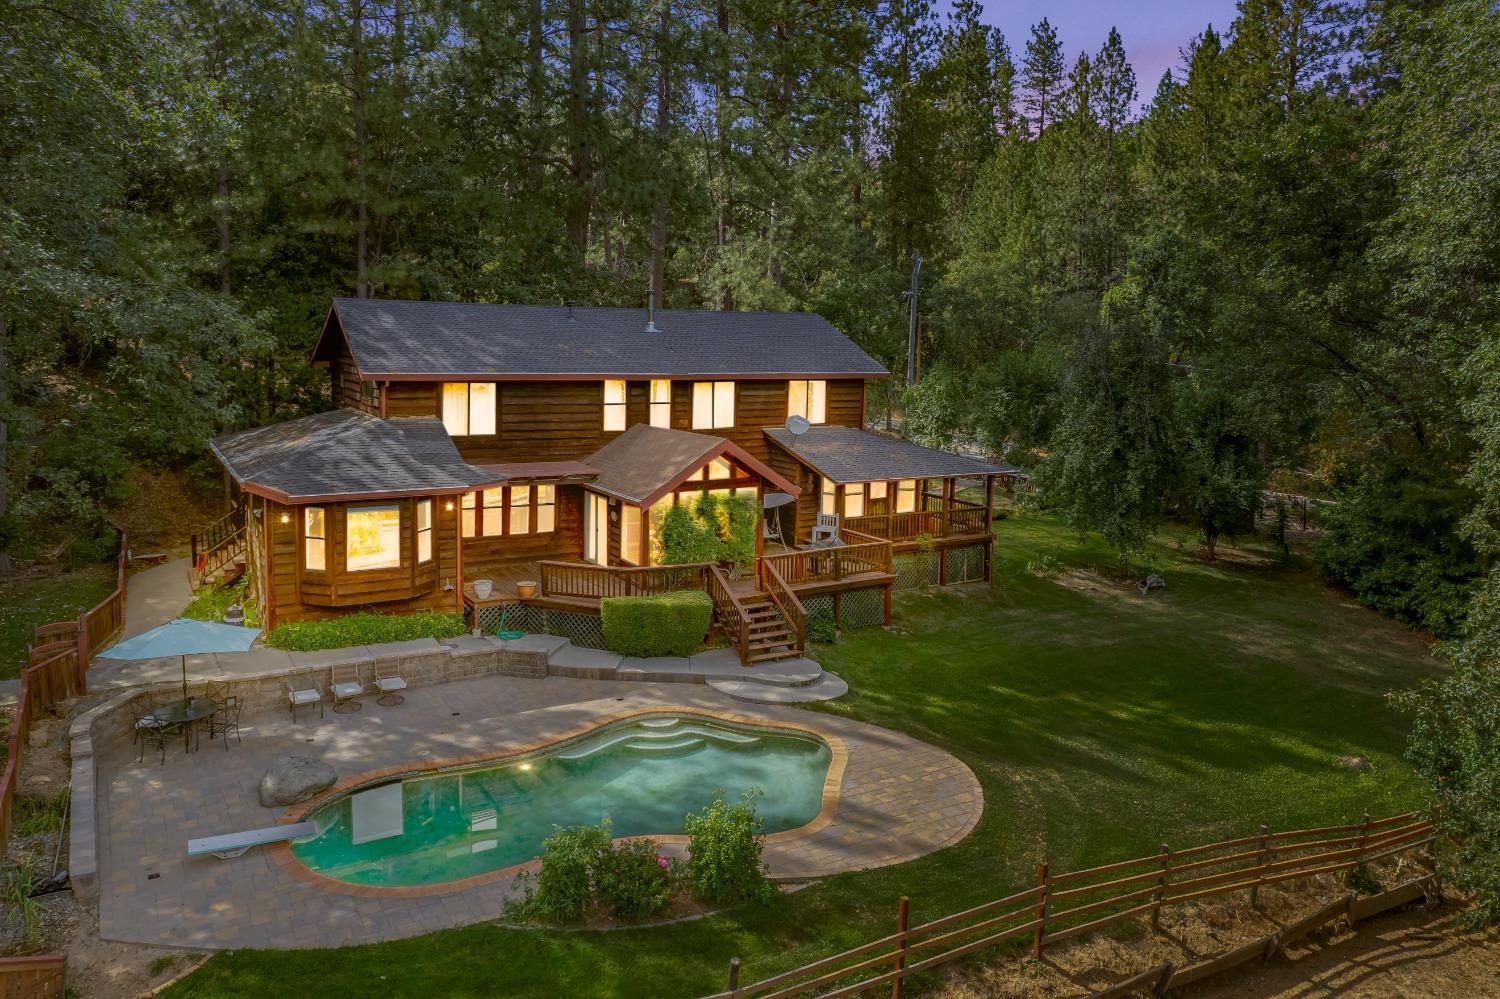 Photo of 16357 Indian Flat Rd in Nevada City, CA